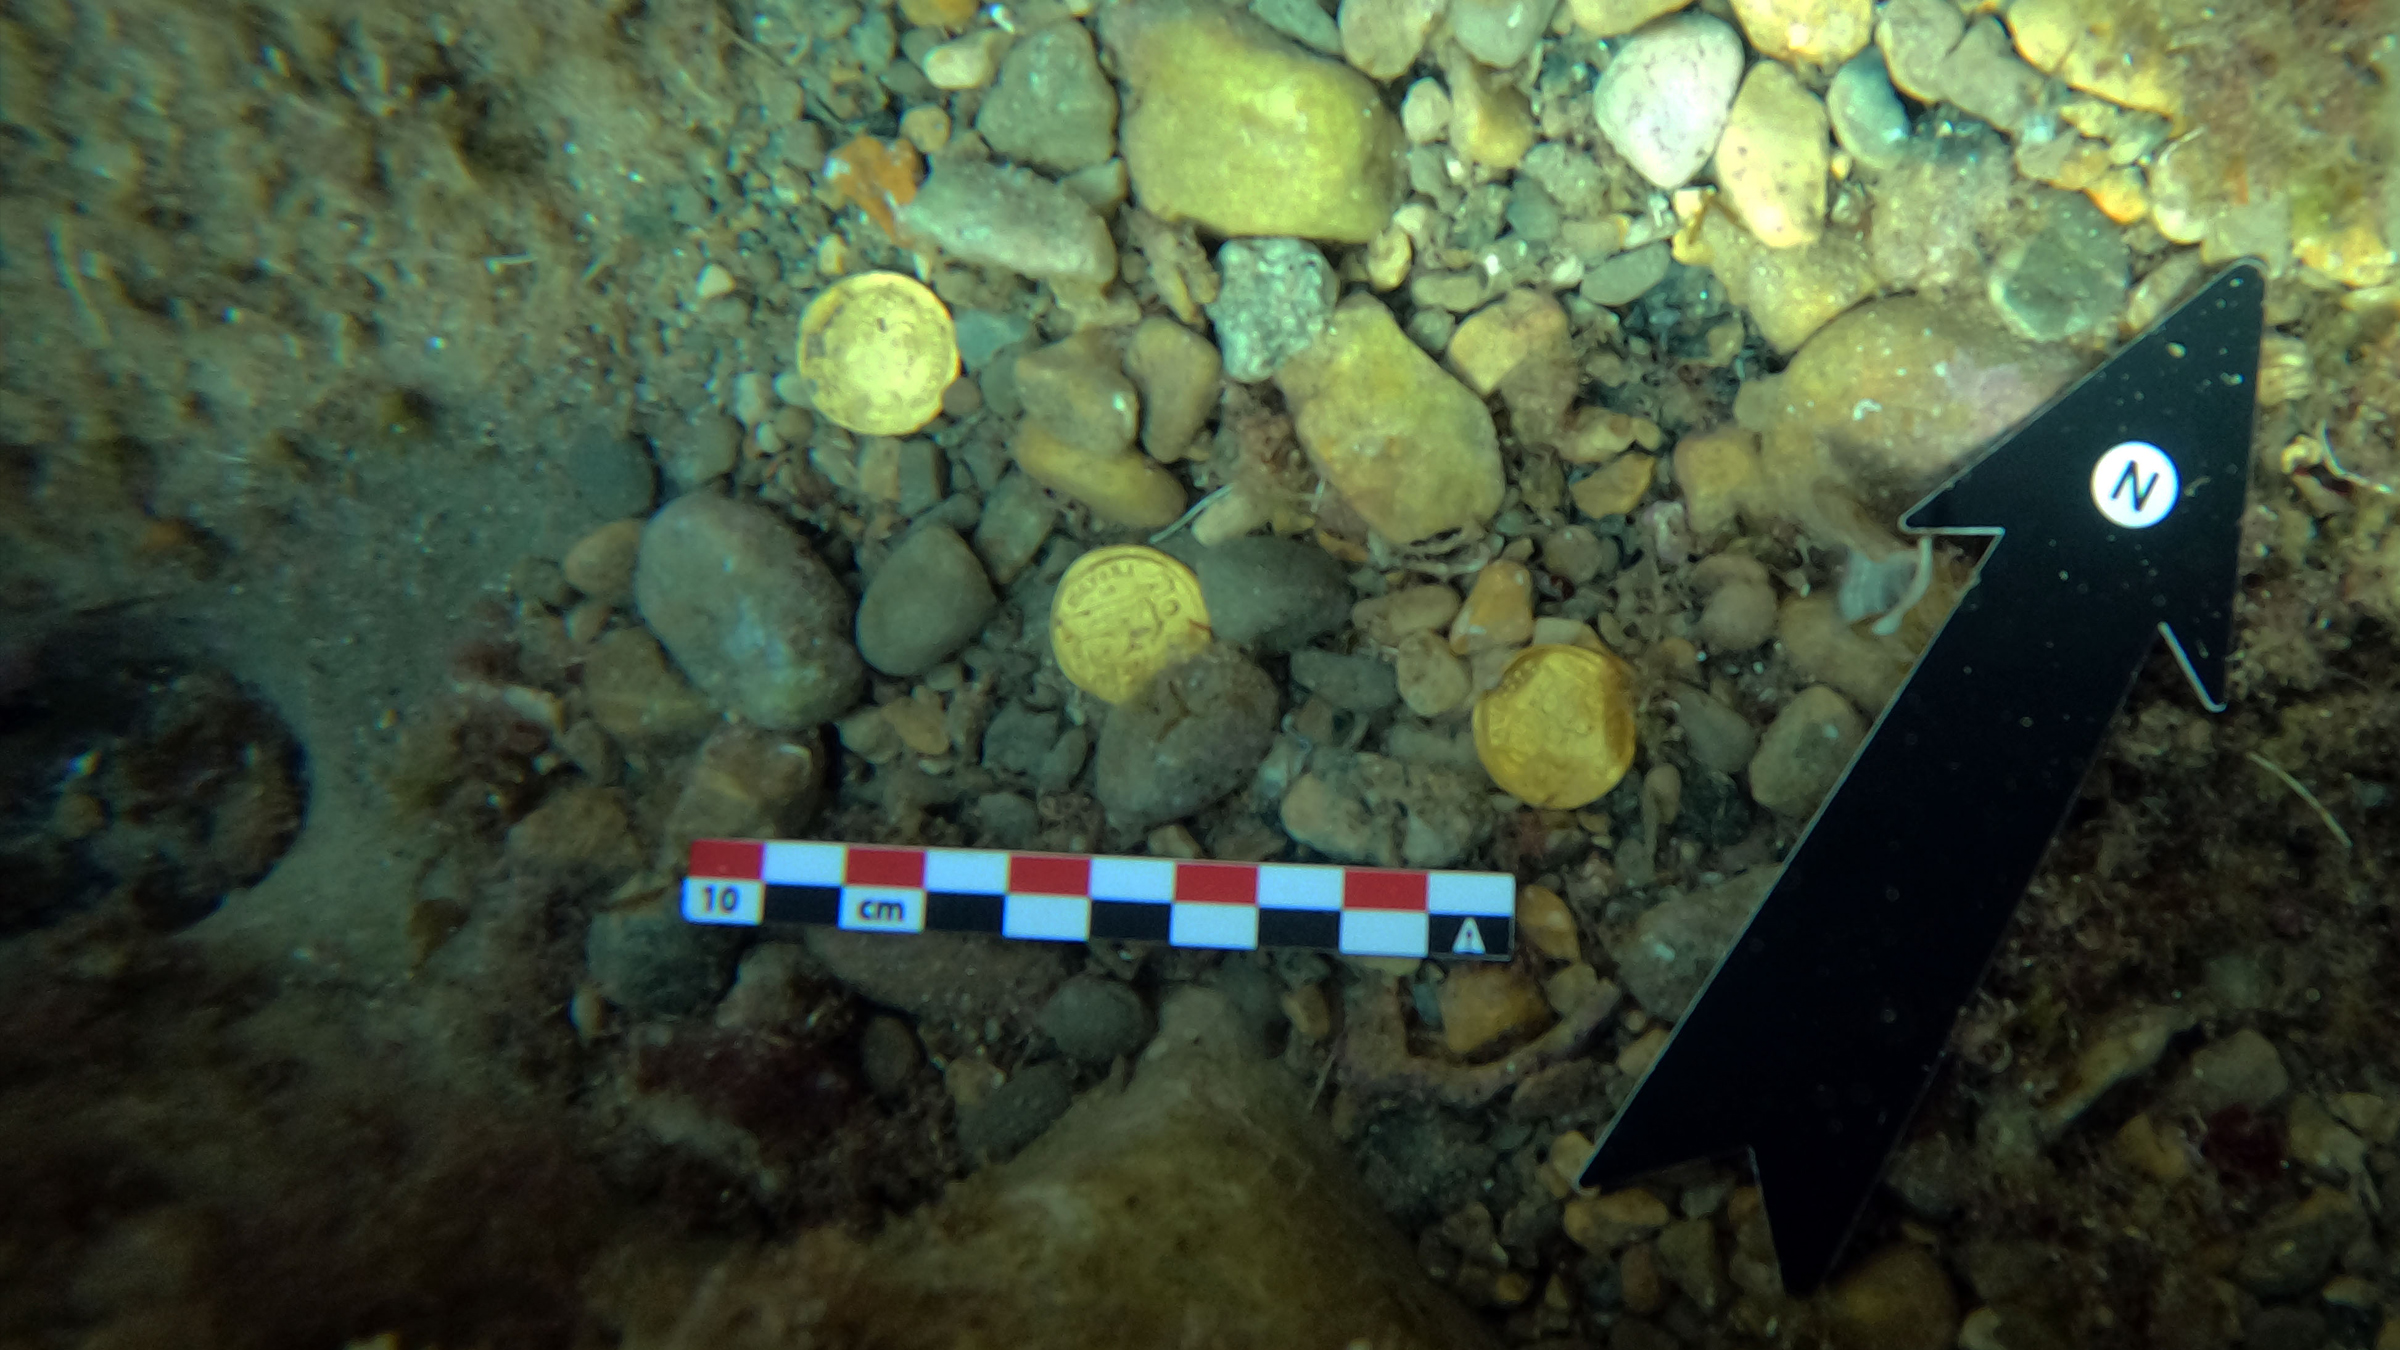 Amateur freedivers find gold treasure dating to the fall of the Roman Empire thumbnail